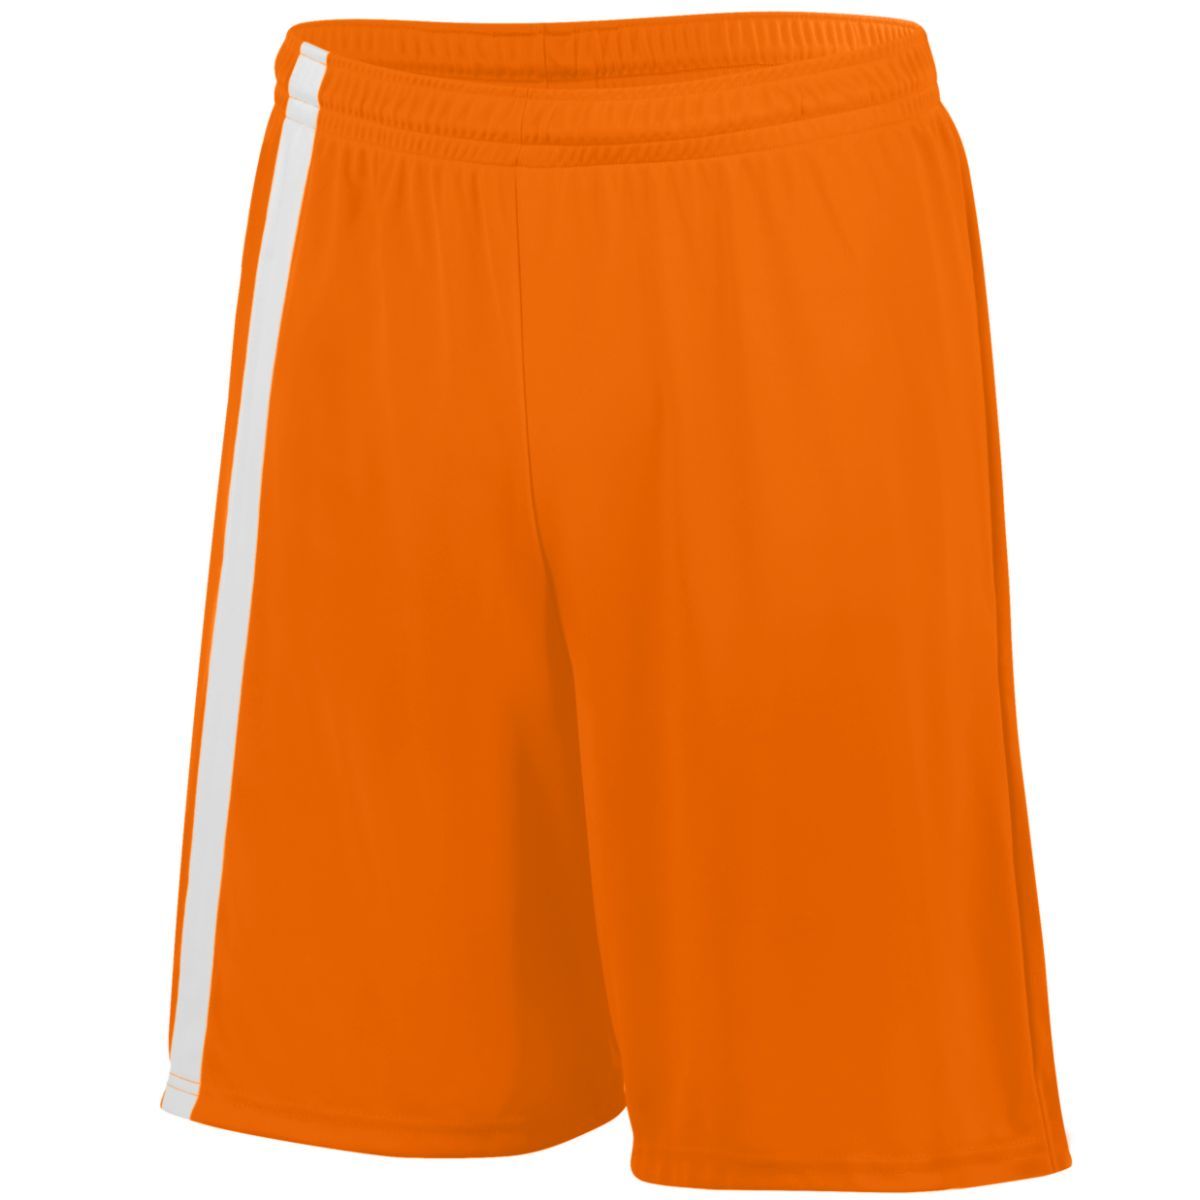 Augusta Sportswear Attacking Third Shorts in Power Orange/White  -Part of the Adult, Adult-Shorts, Augusta-Products, Soccer, All-Sports-1 product lines at KanaleyCreations.com